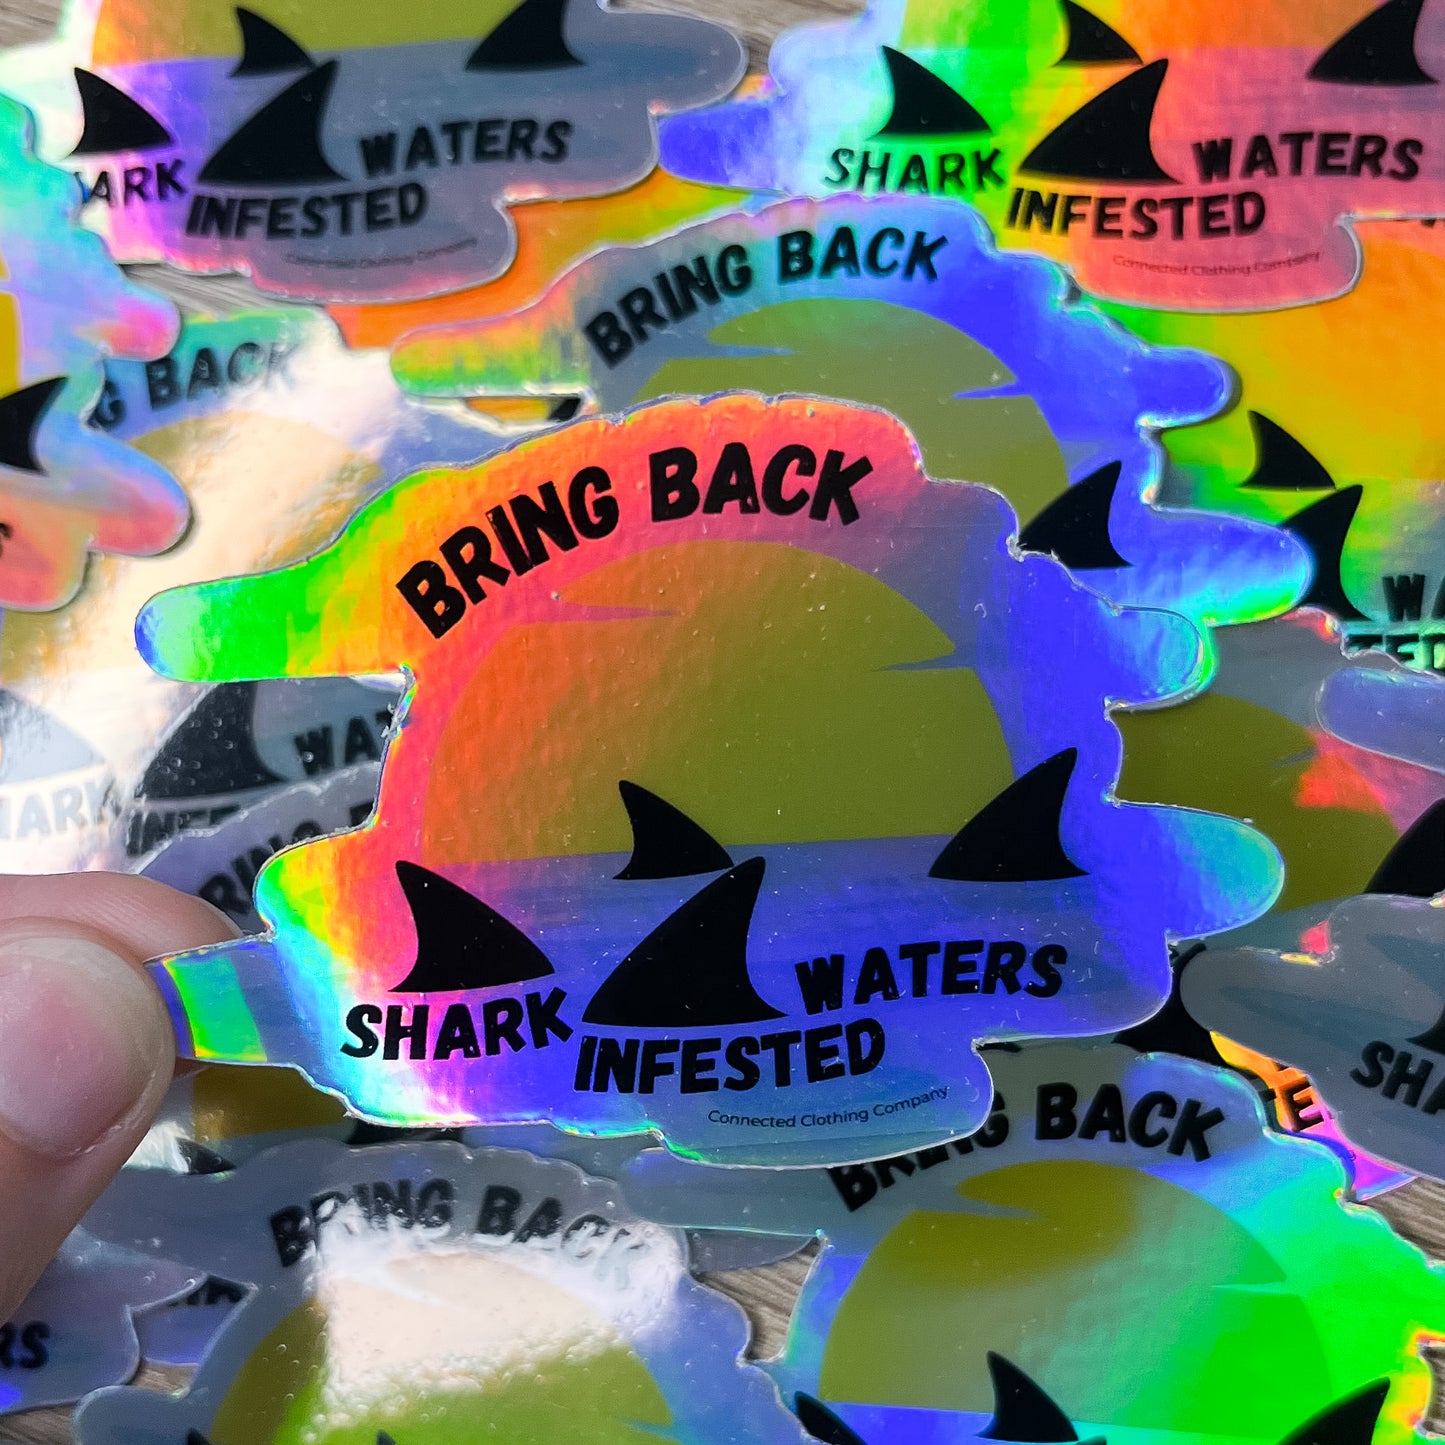 Bring Back Shark Infested Waters Holographic Sticker - Connected Clothing Company - 10% donated to ocean conservation